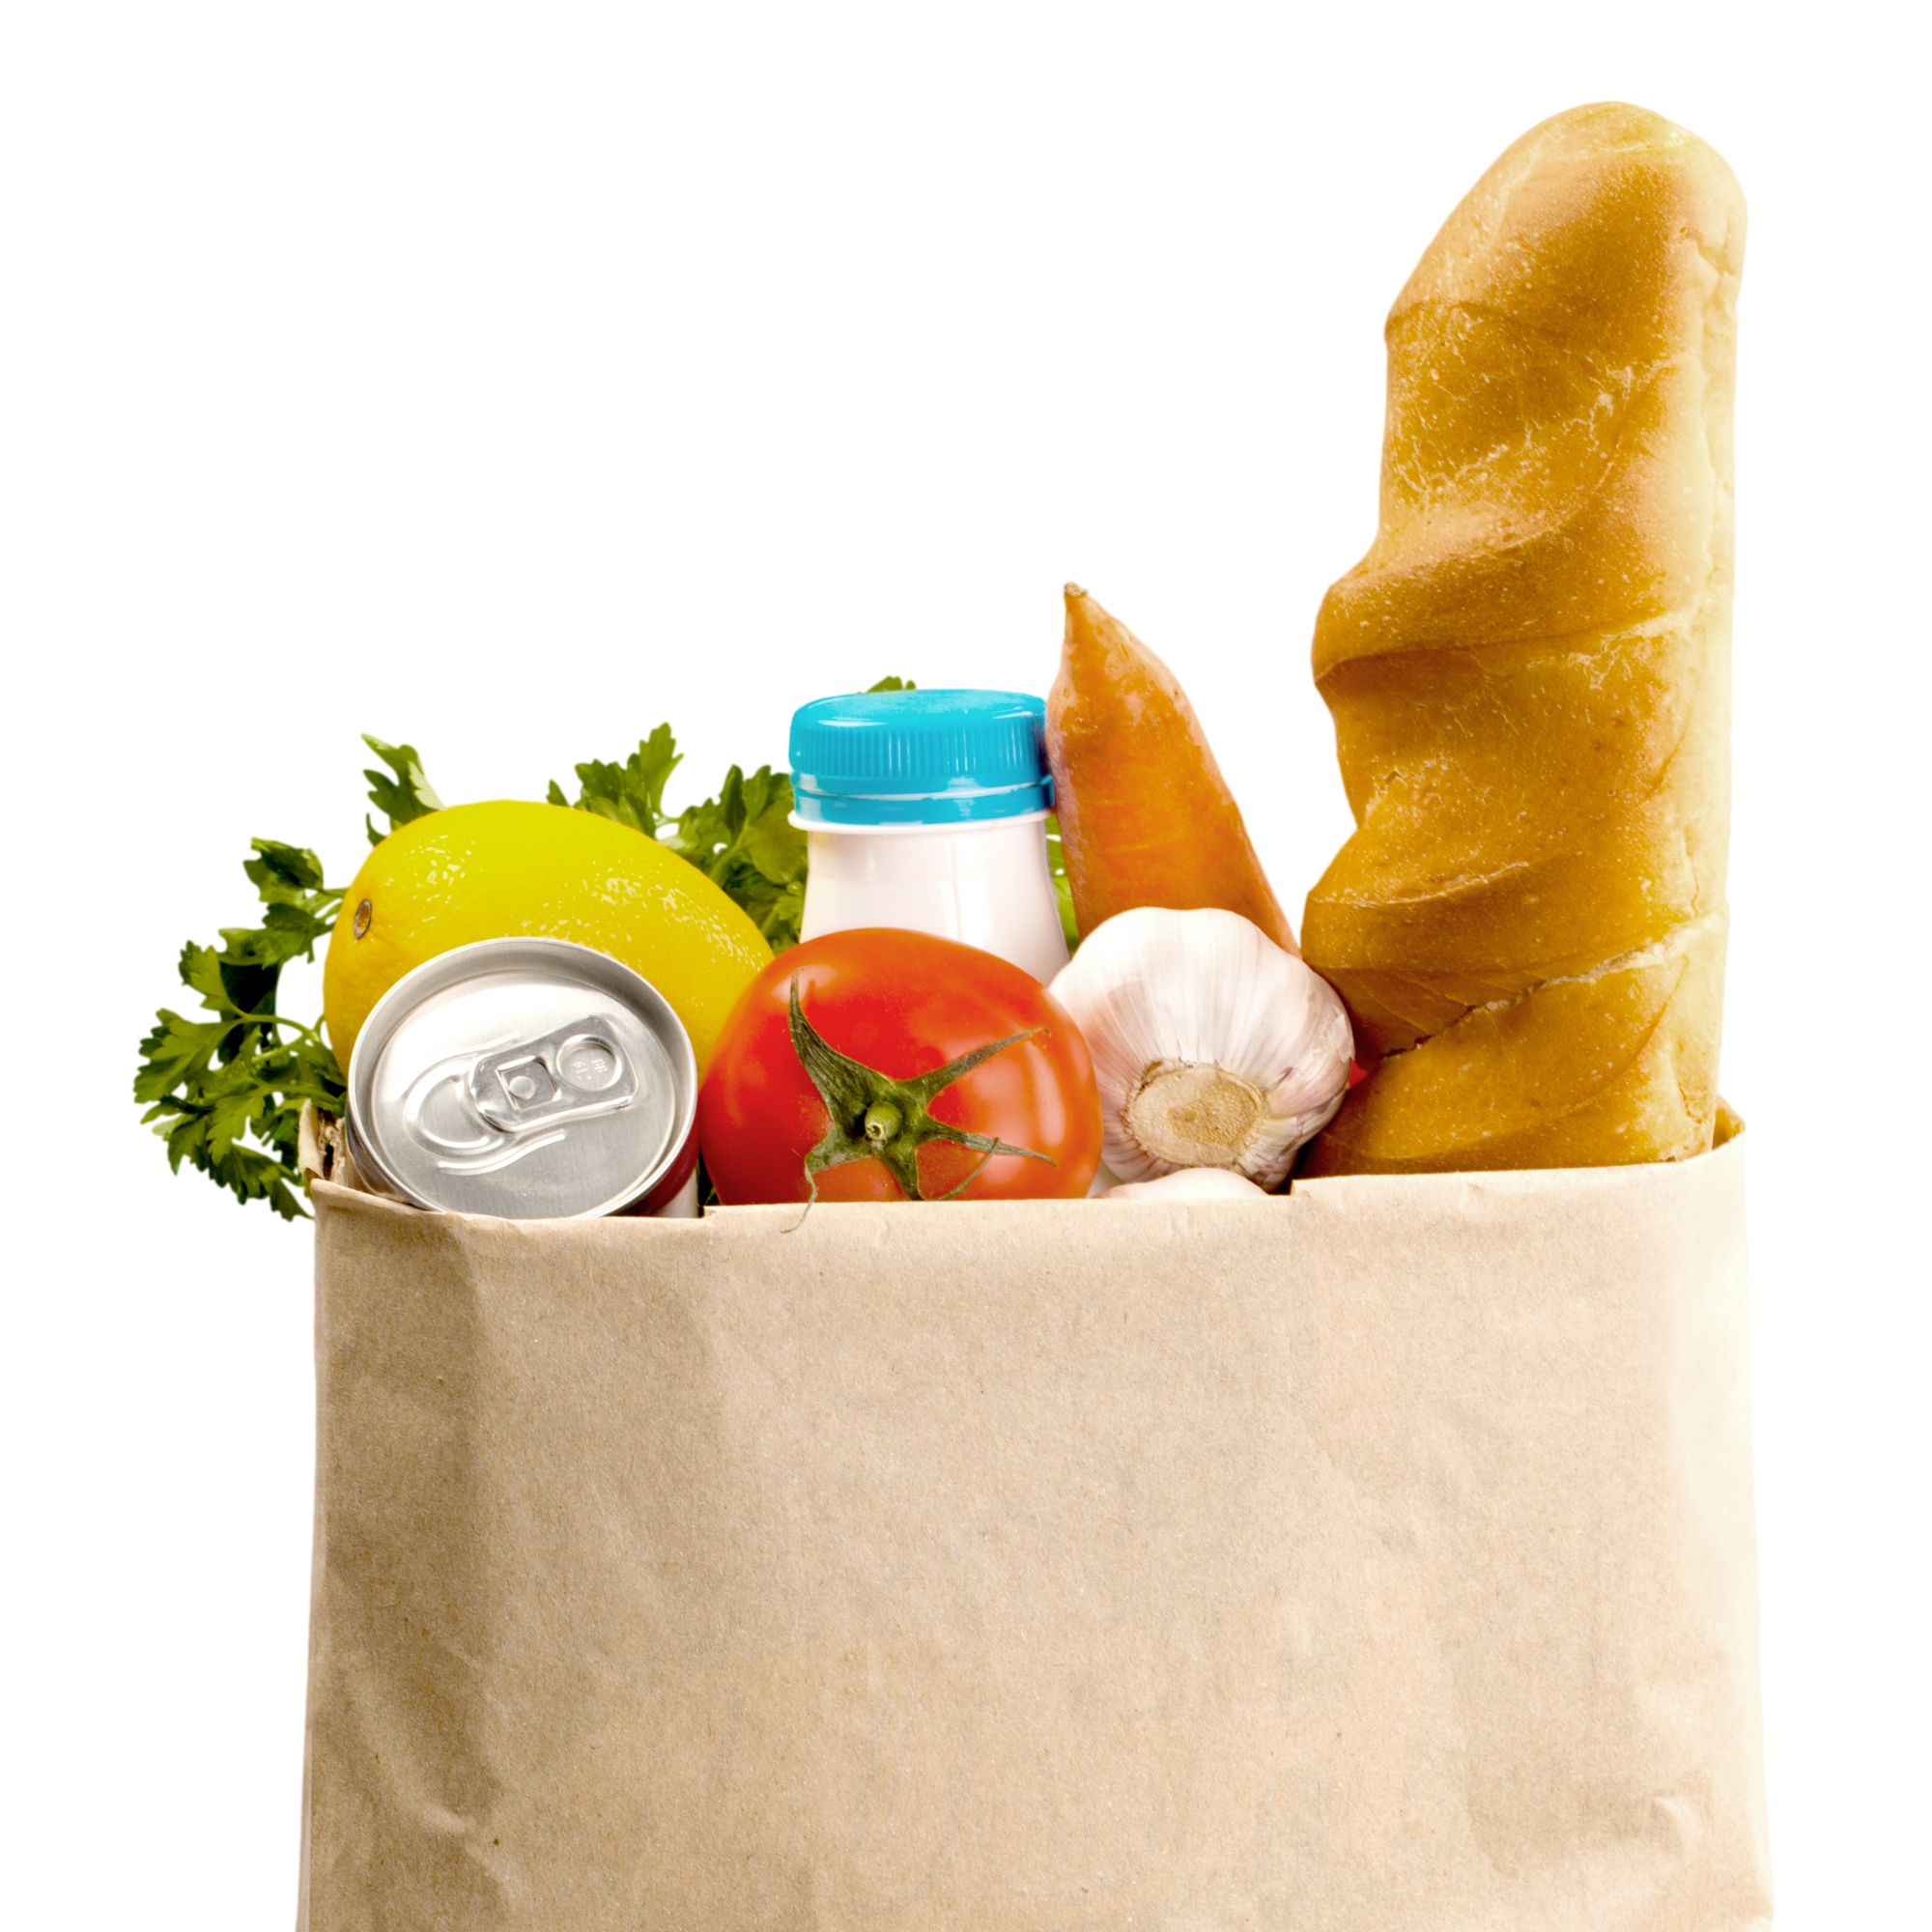 grocery bag with loaf of french bread, tomato, garlic, soda can and milk